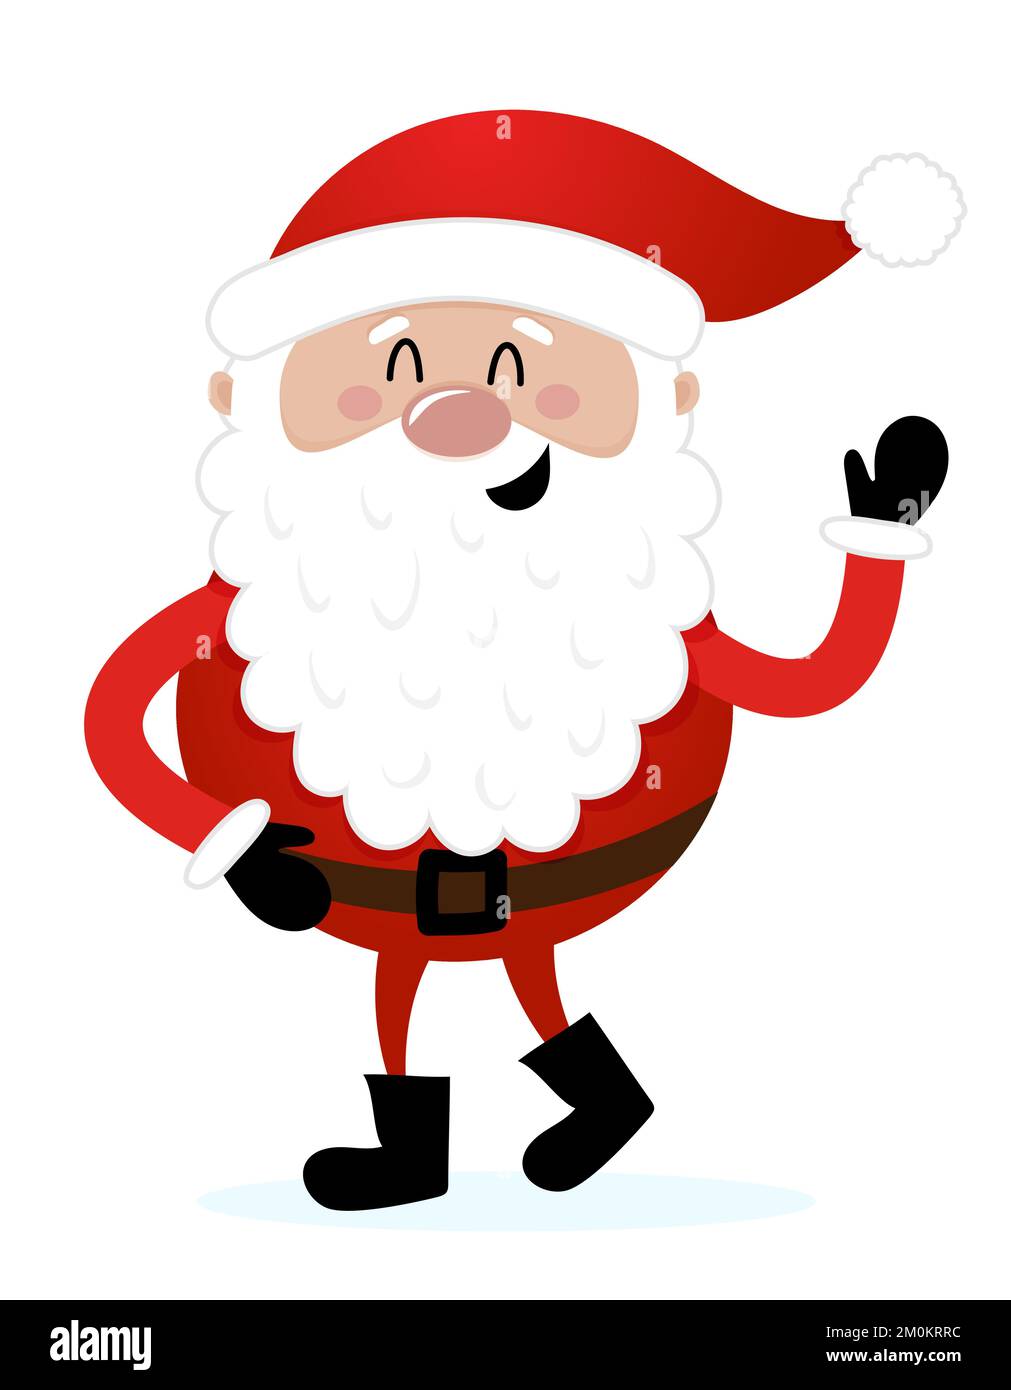 Standing Santa waving - illustration in cartoon style. Merry Christmas and happy new year. Funny characters in Santa's workshop. Stock Vector